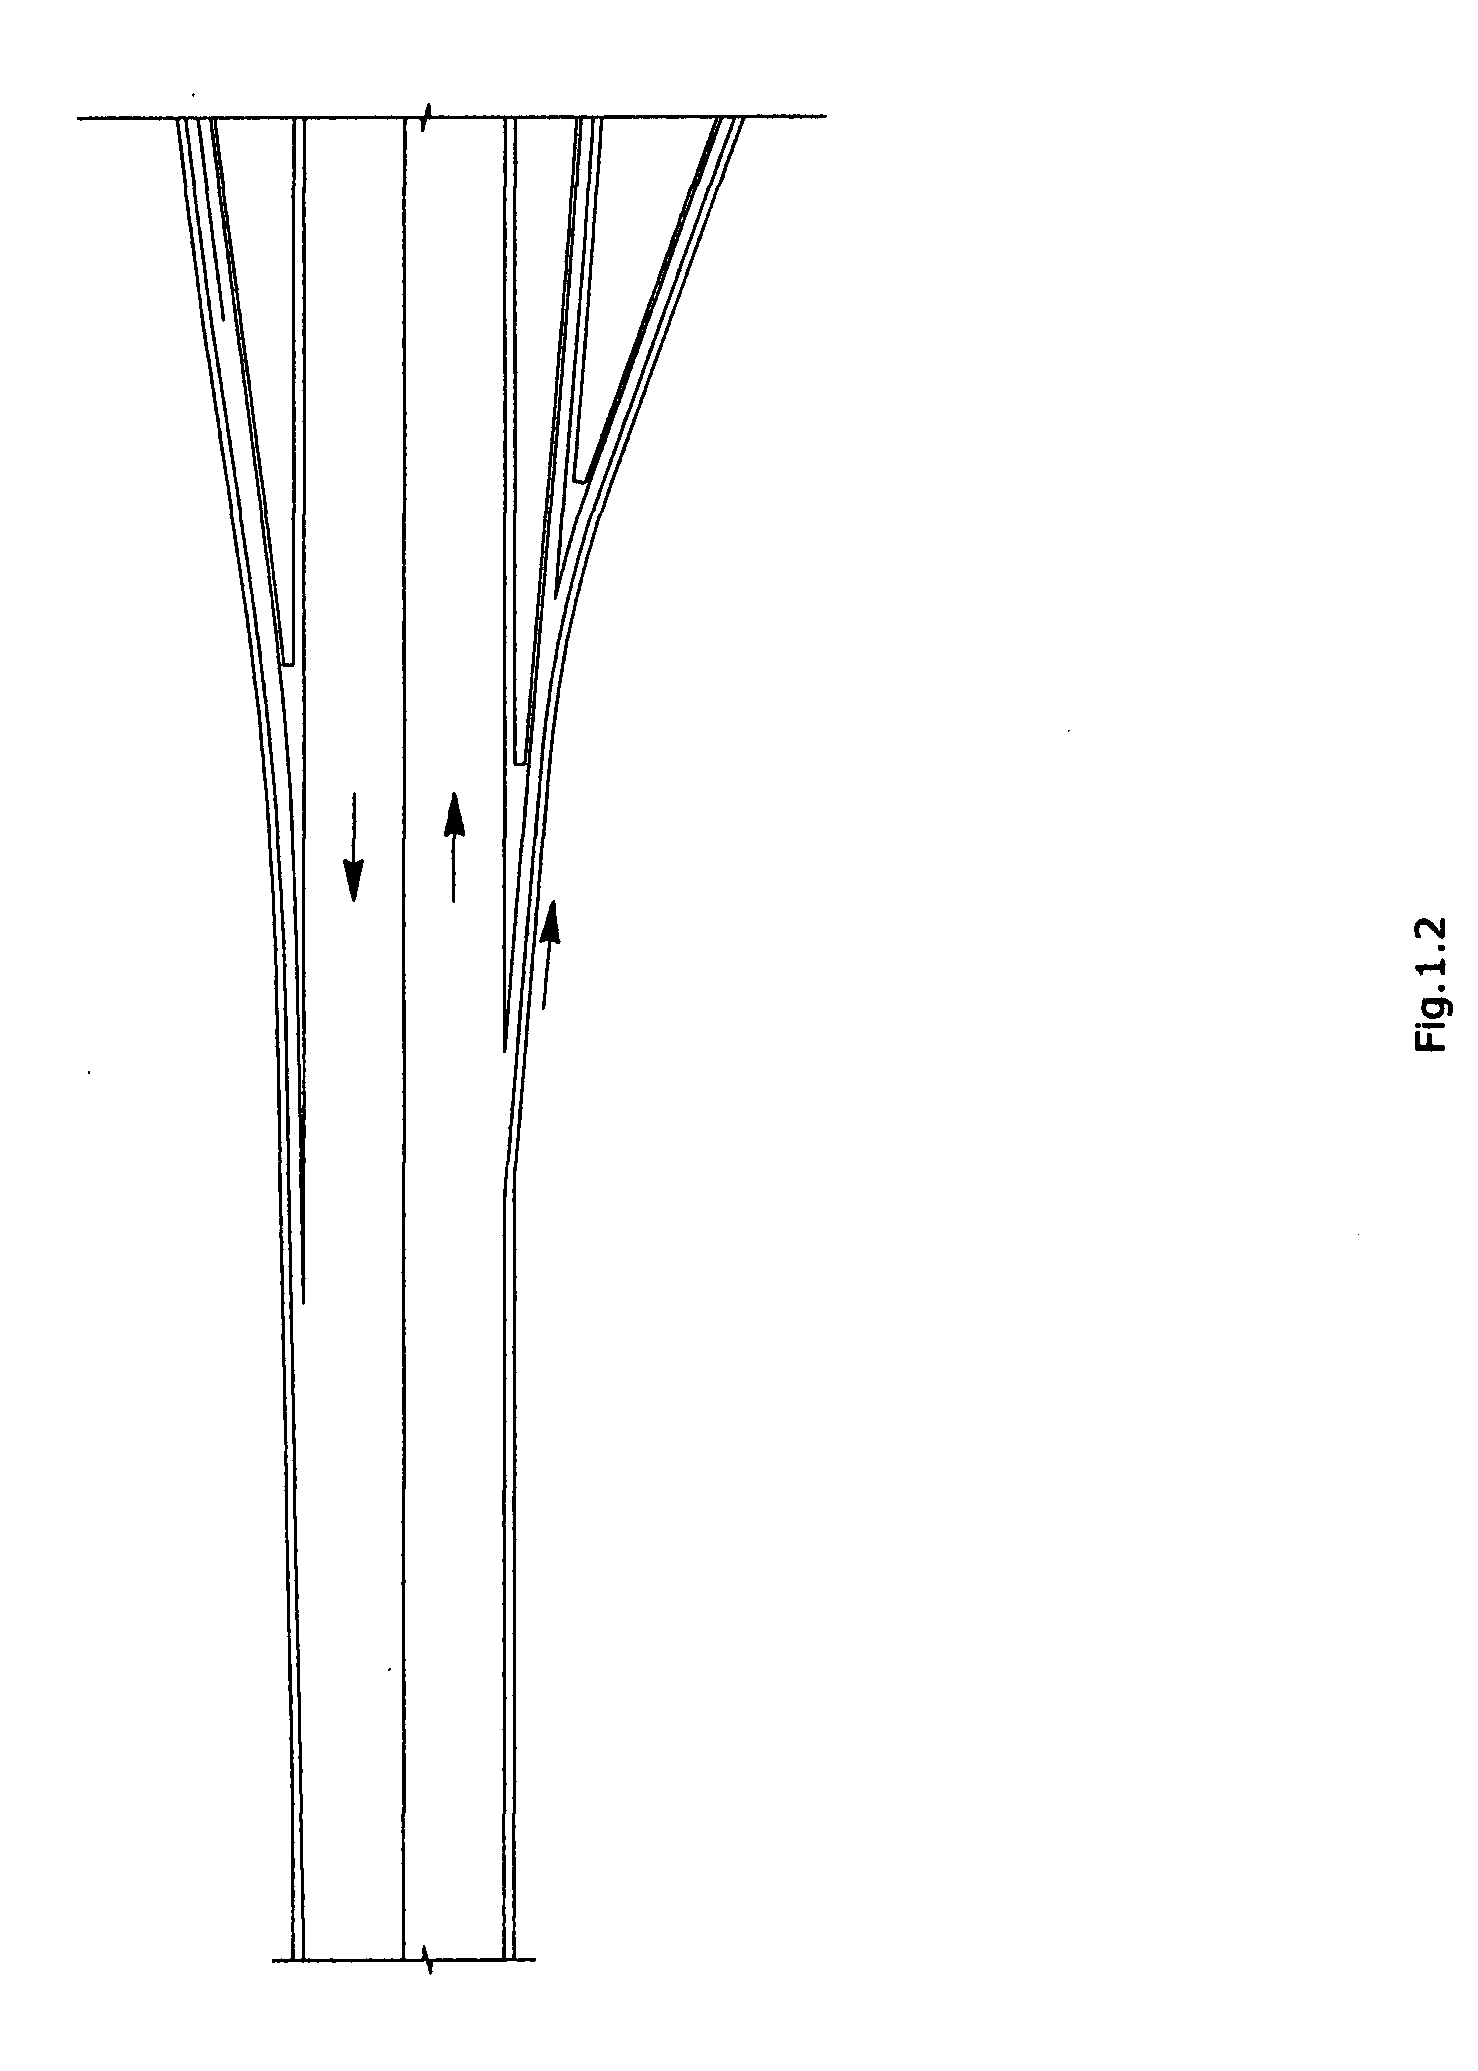 Weaving free two level cloverleaf type interchange for a highway crossing under a street